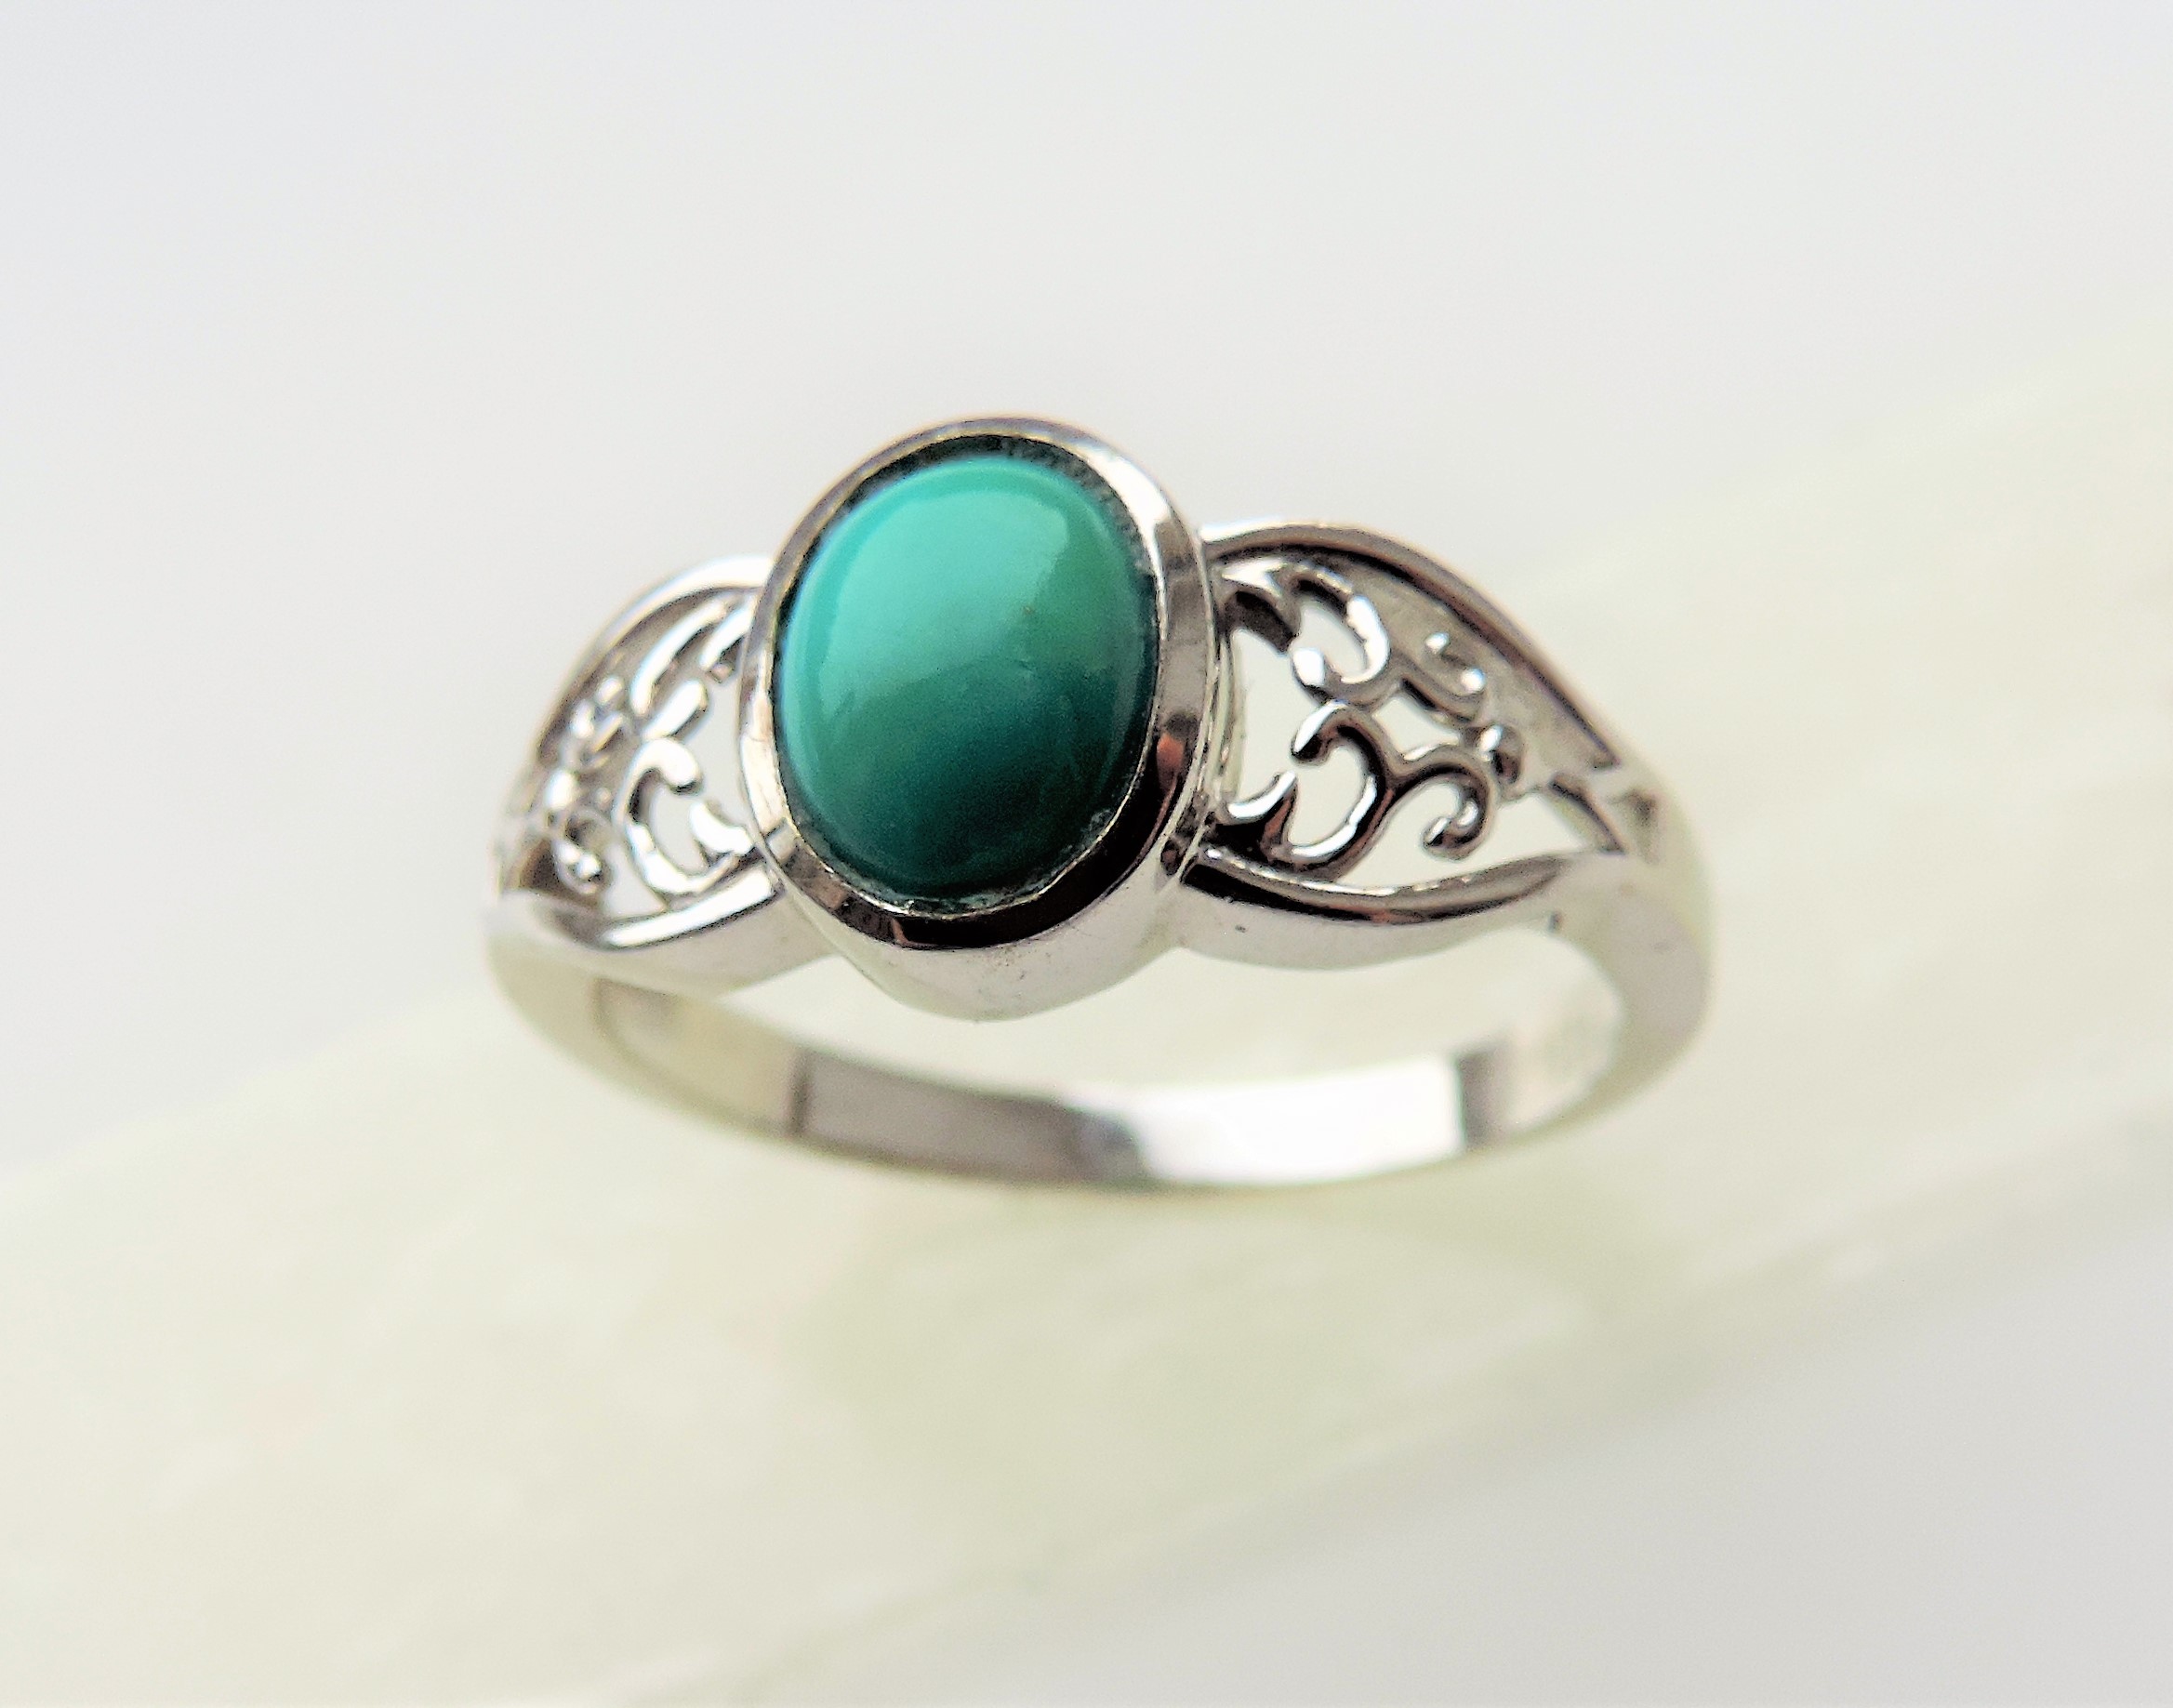 Turquoise Ring in 925 Sterling Silver - Image 2 of 5